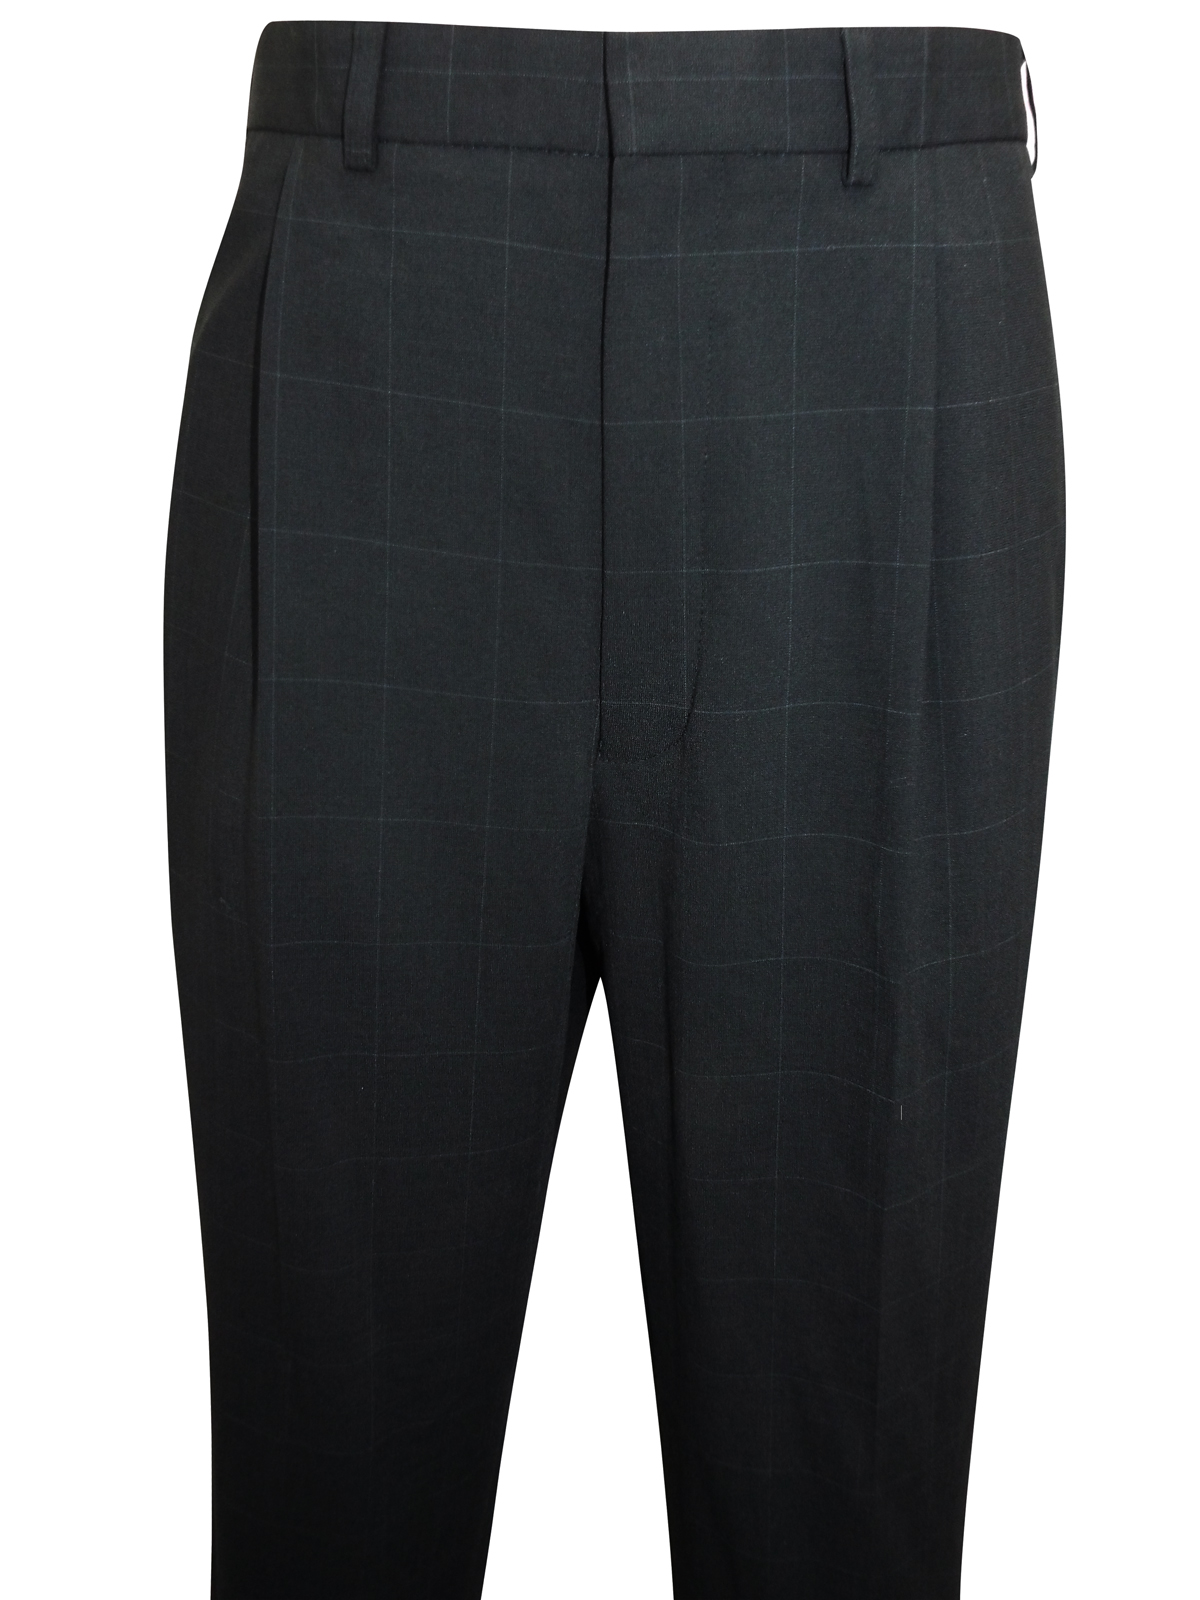 Marks and Spencer - - M&5 BLACK Single Pleat Checked Trousers with Wool ...